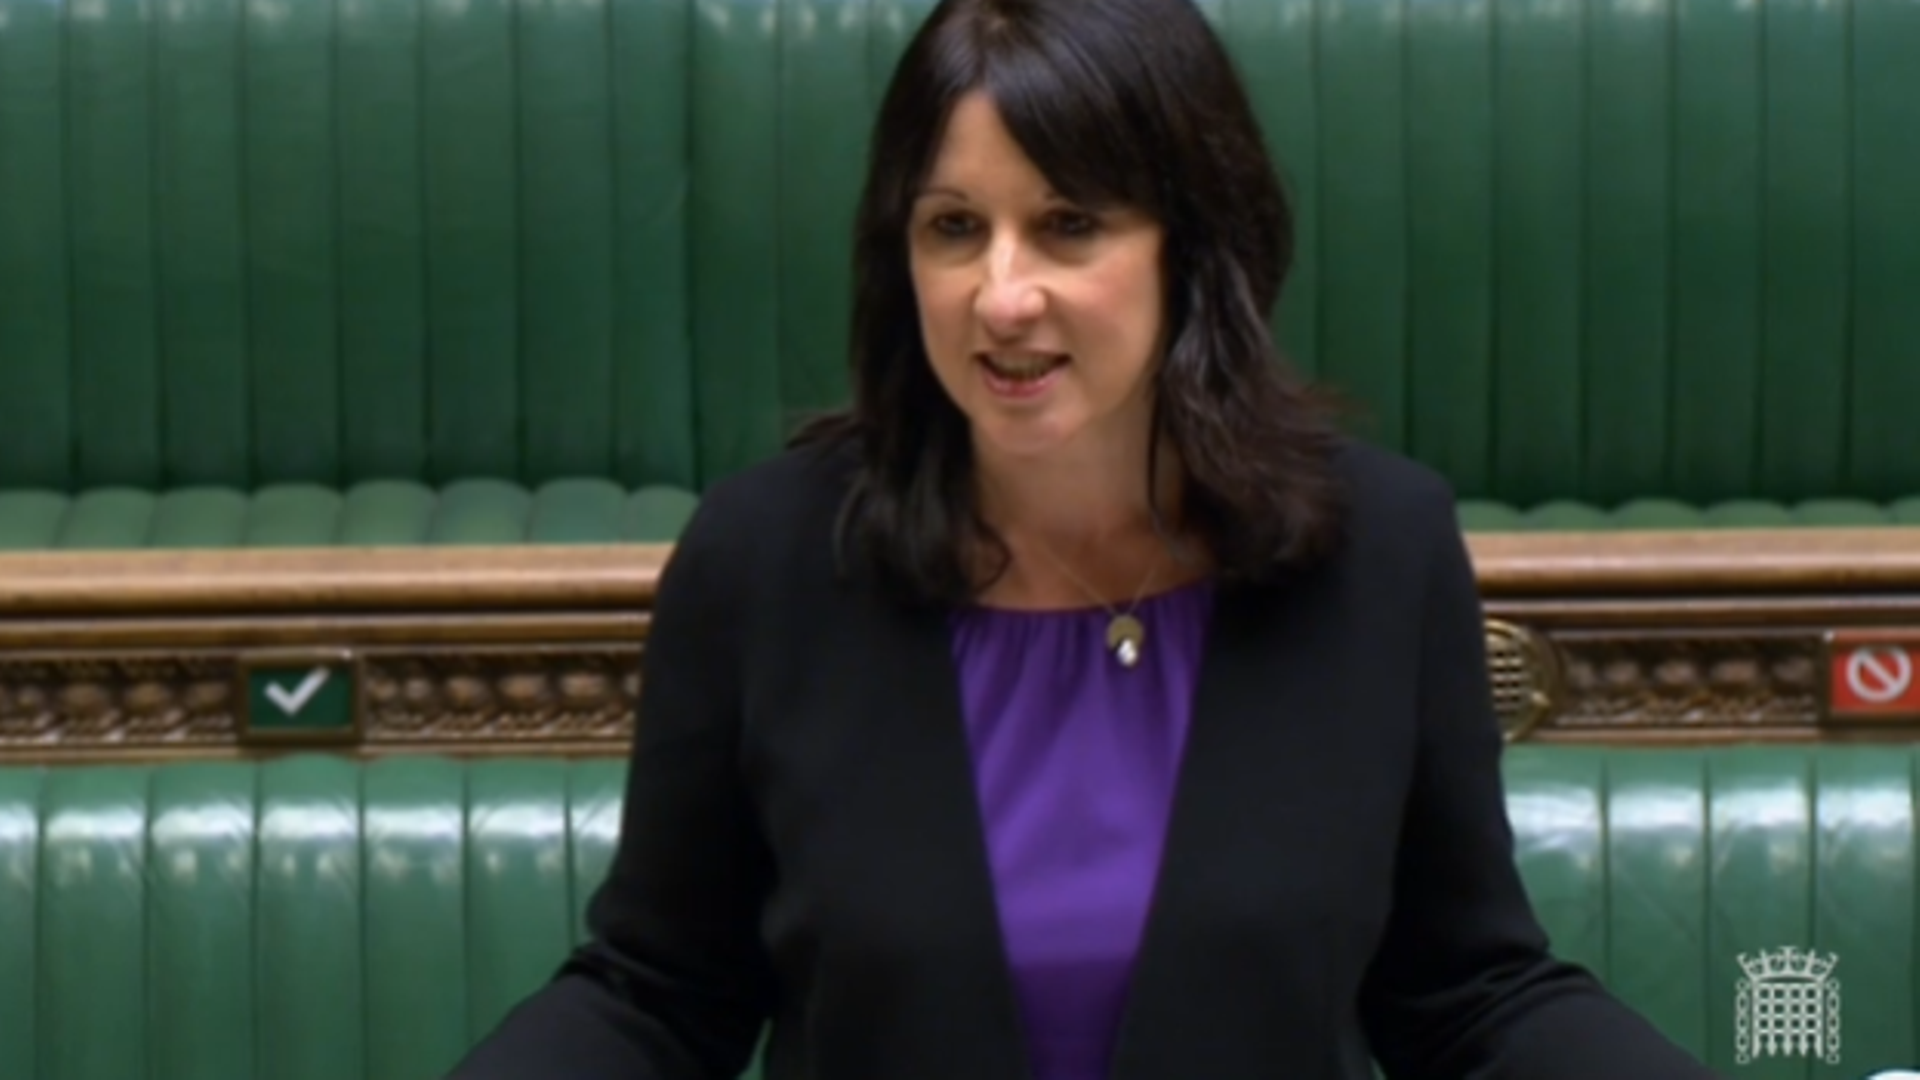 Rachel Reeves in the House of Commons - Credit: Parliament Live